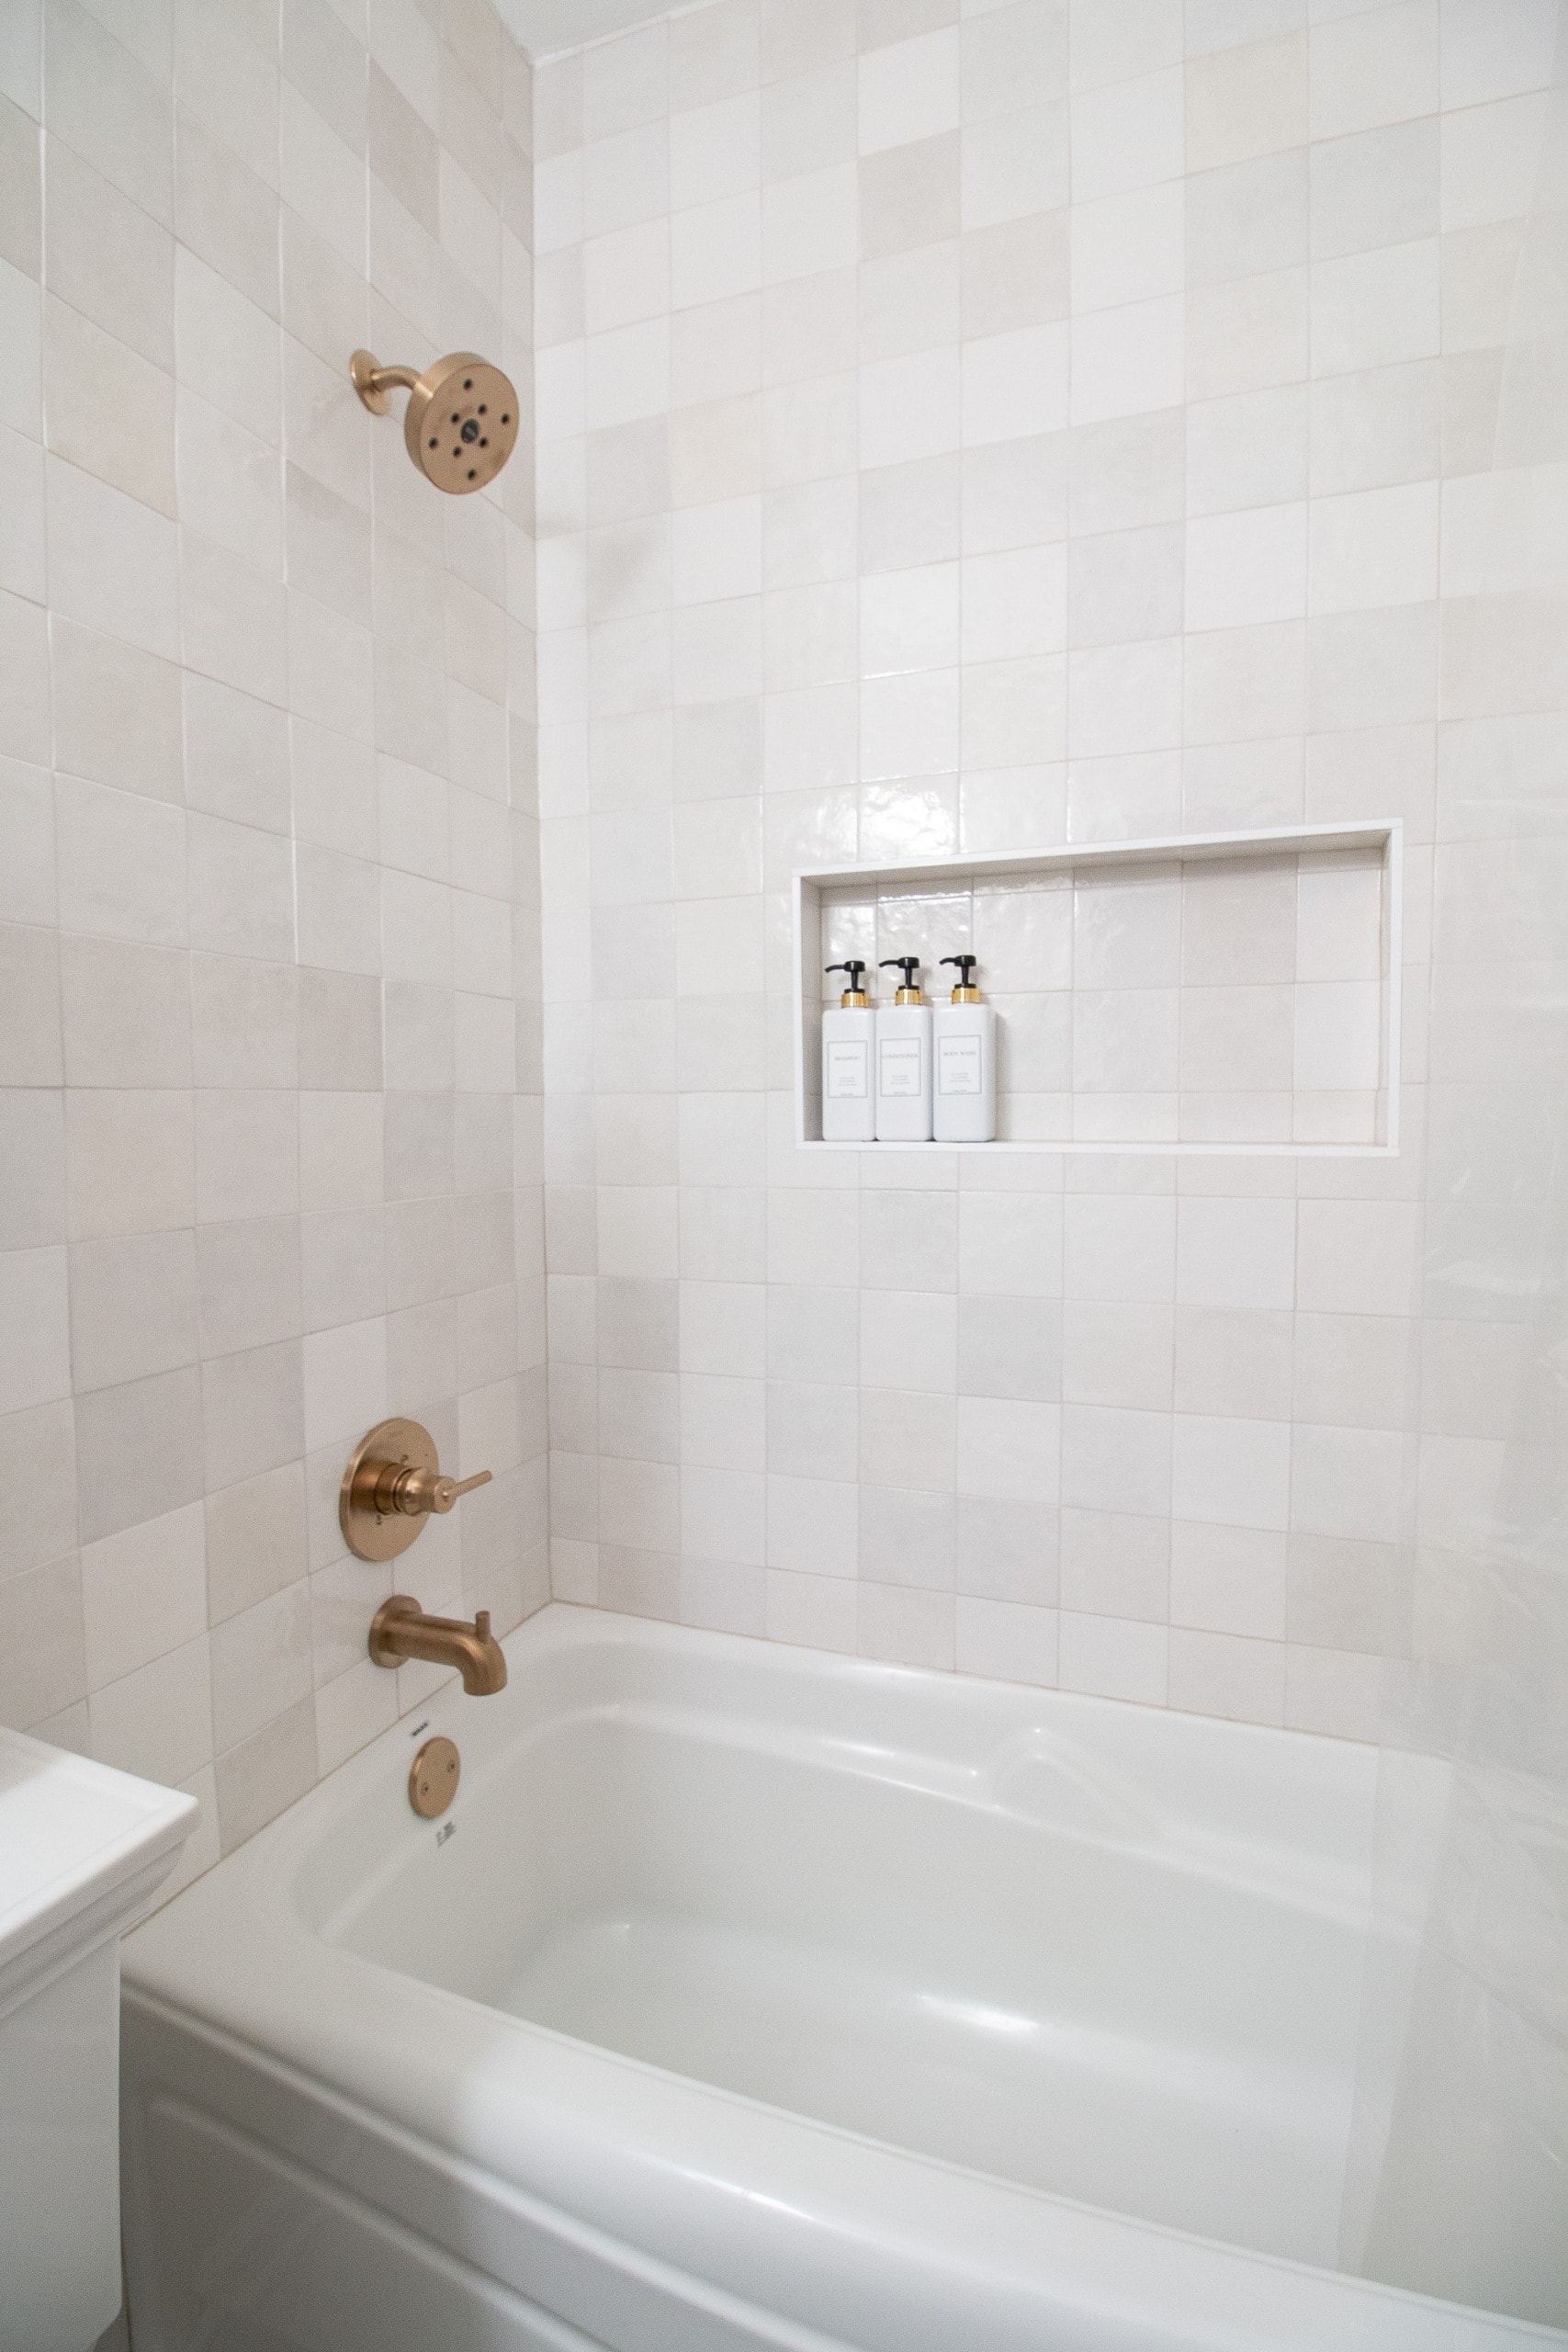 White shower tile in this gray and gold bathroom